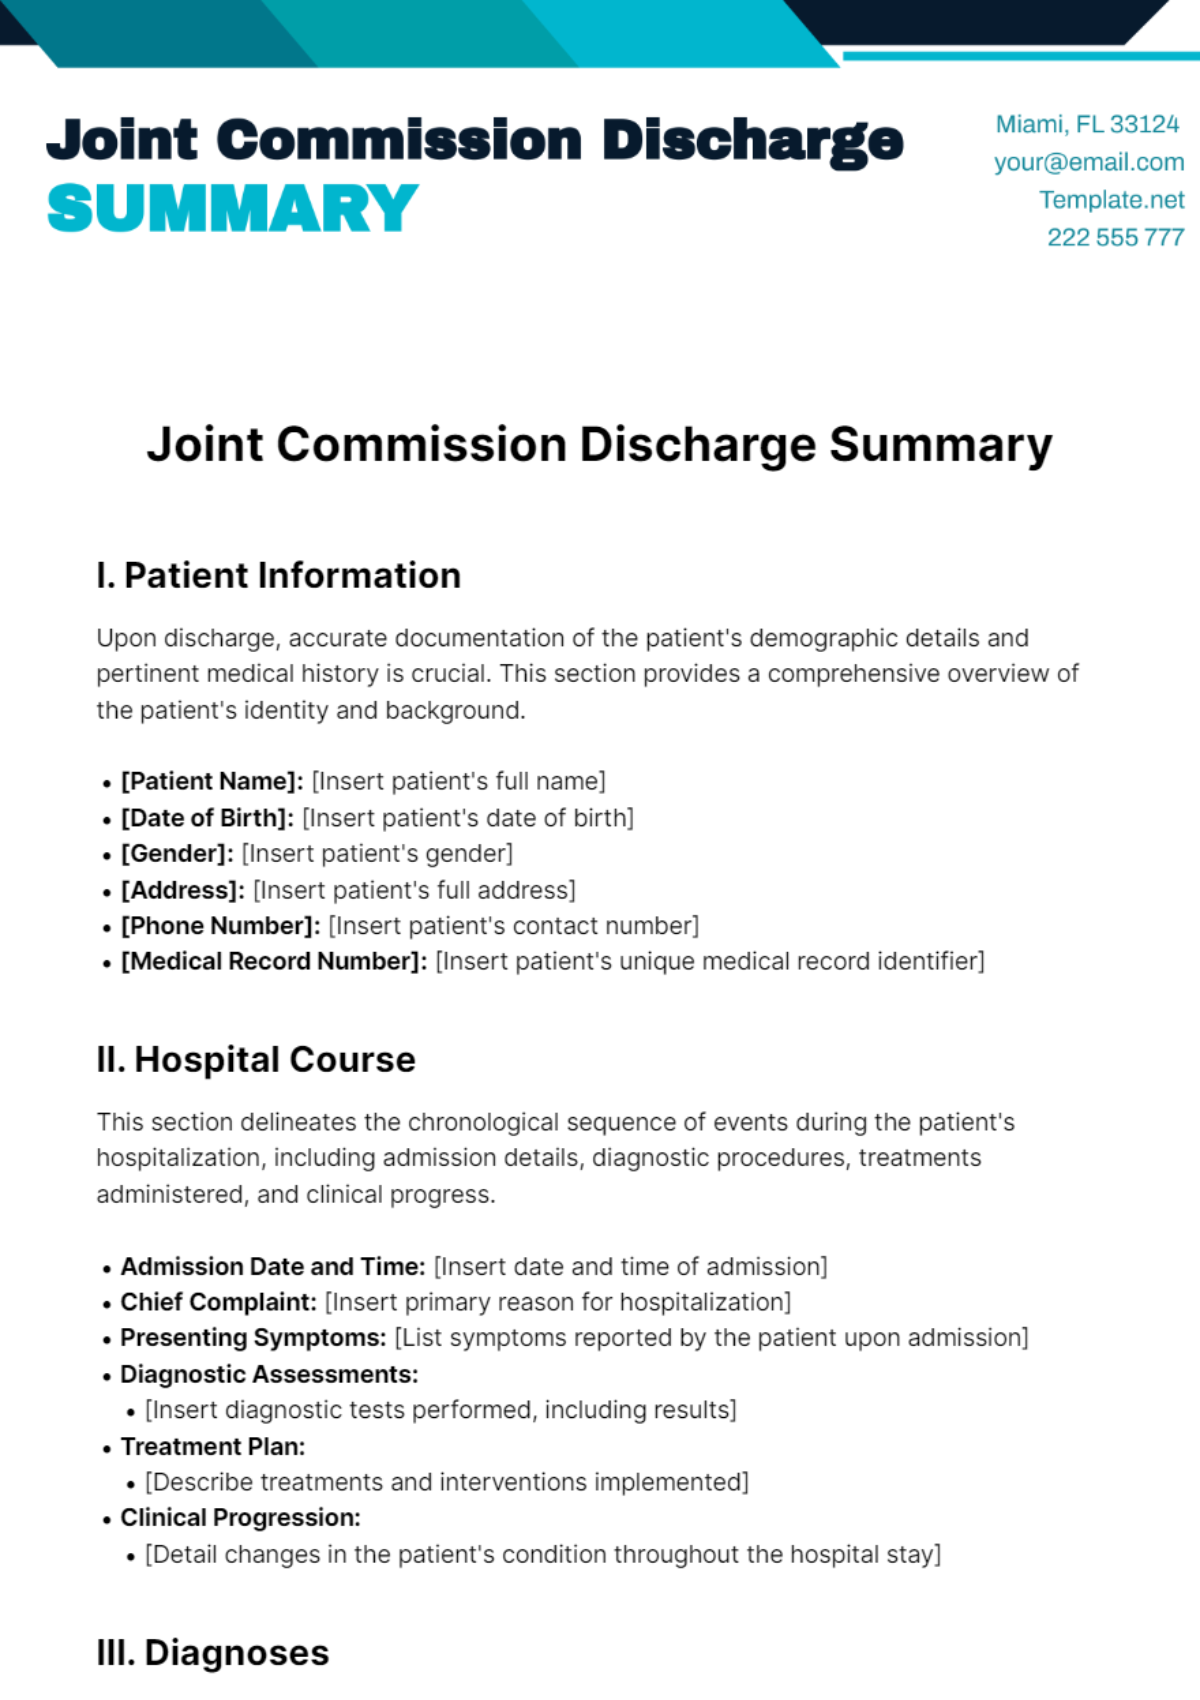 Joint Commission Discharge Summary Template 